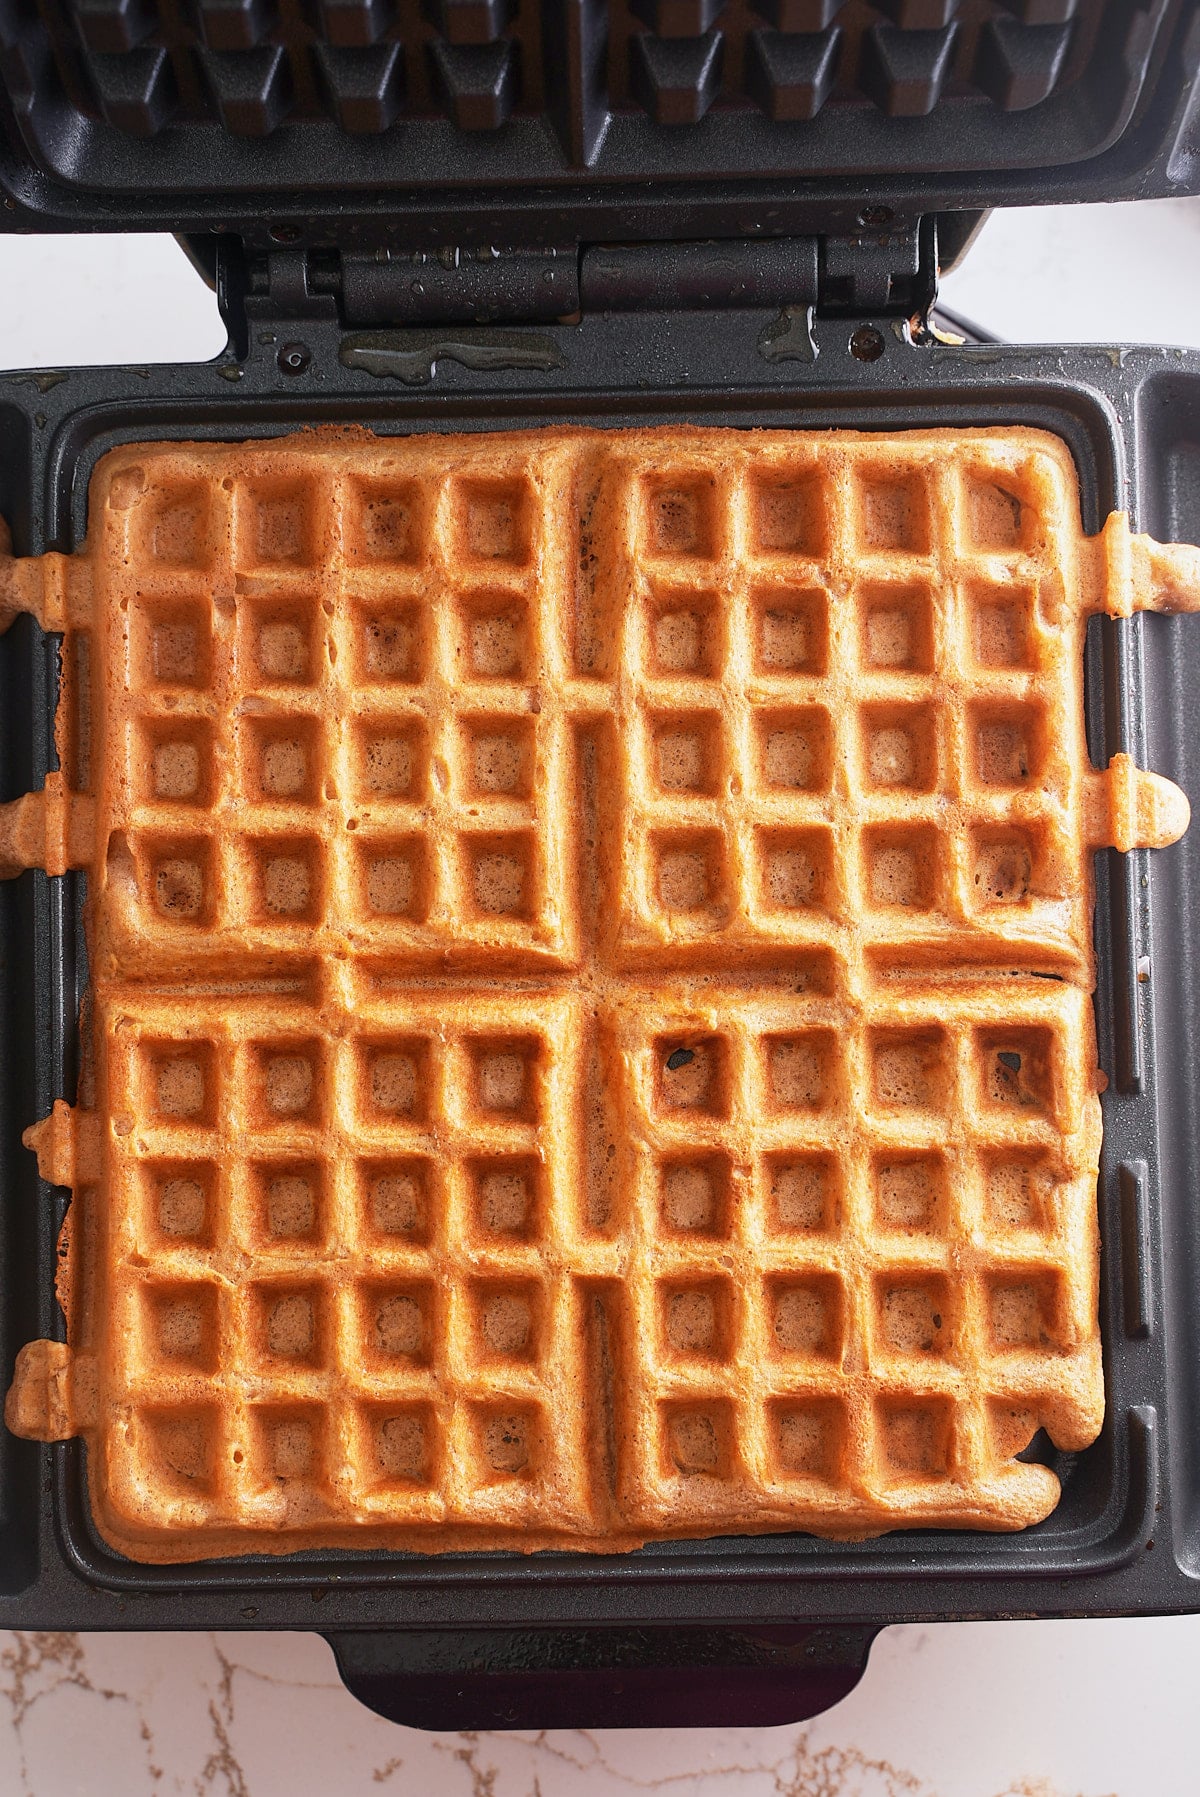 Four cooked sweet potato waffles in a waffle iron.